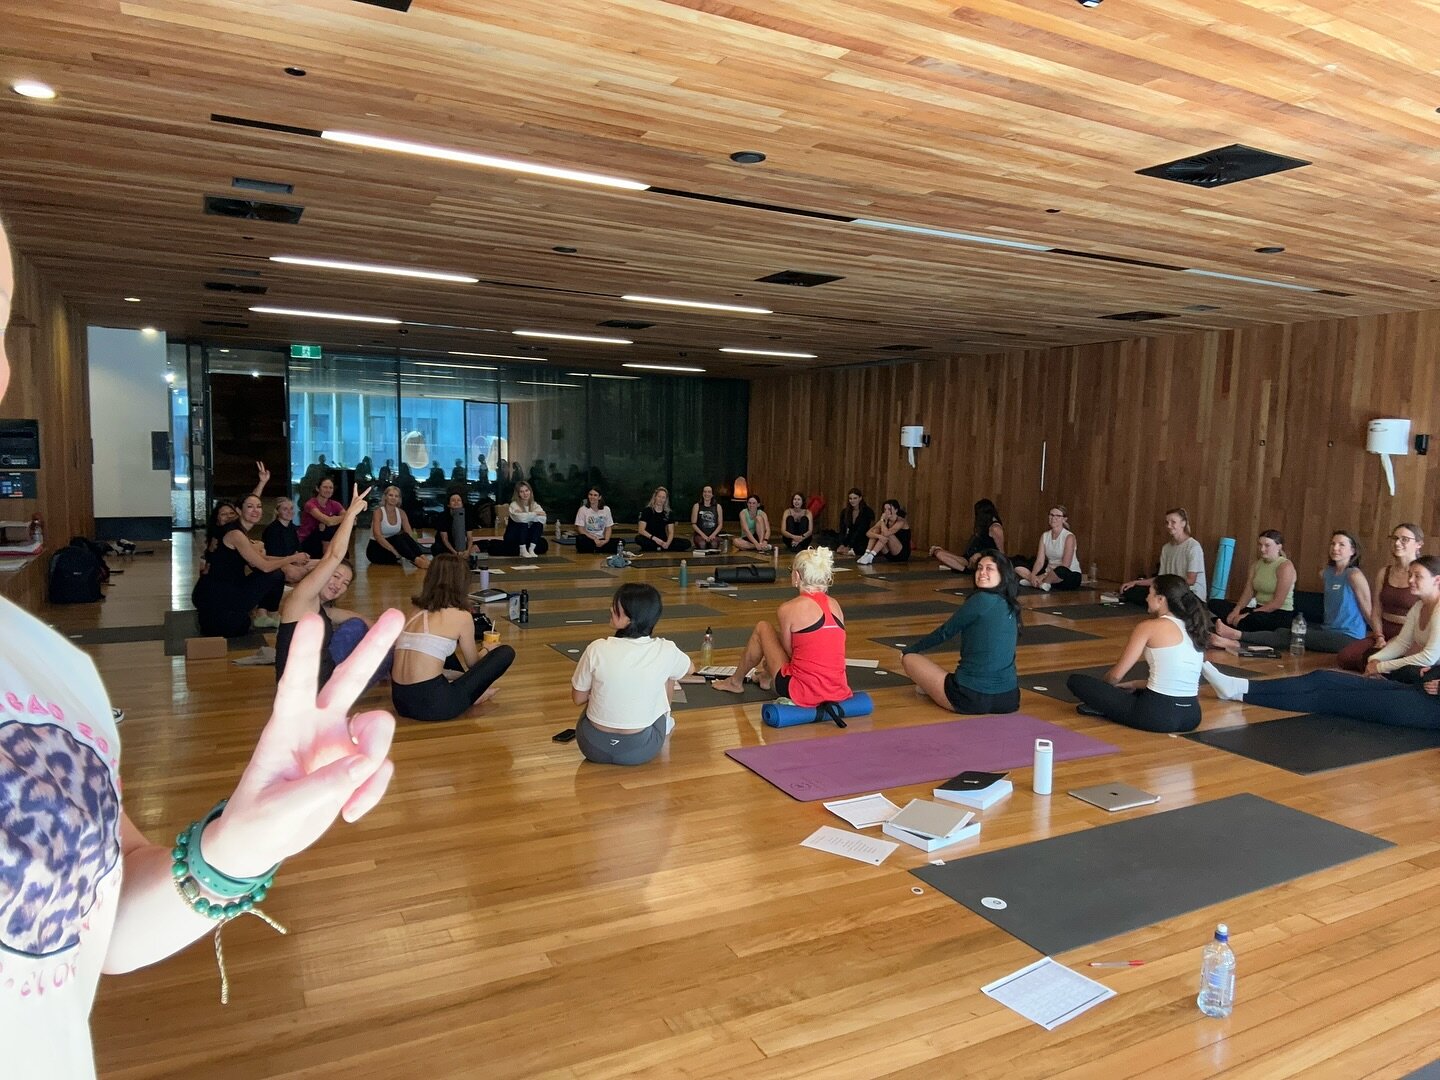 ONE DOWN, THREE TO GO! ✌🏽

Yesterday was Day 1 of the @studio_pilates Pilates Mat Work Course at @virginactiveaustralia. As we head into Day 2 today, the excitement for bringing these classes to The Space is super high. The countdown is on!